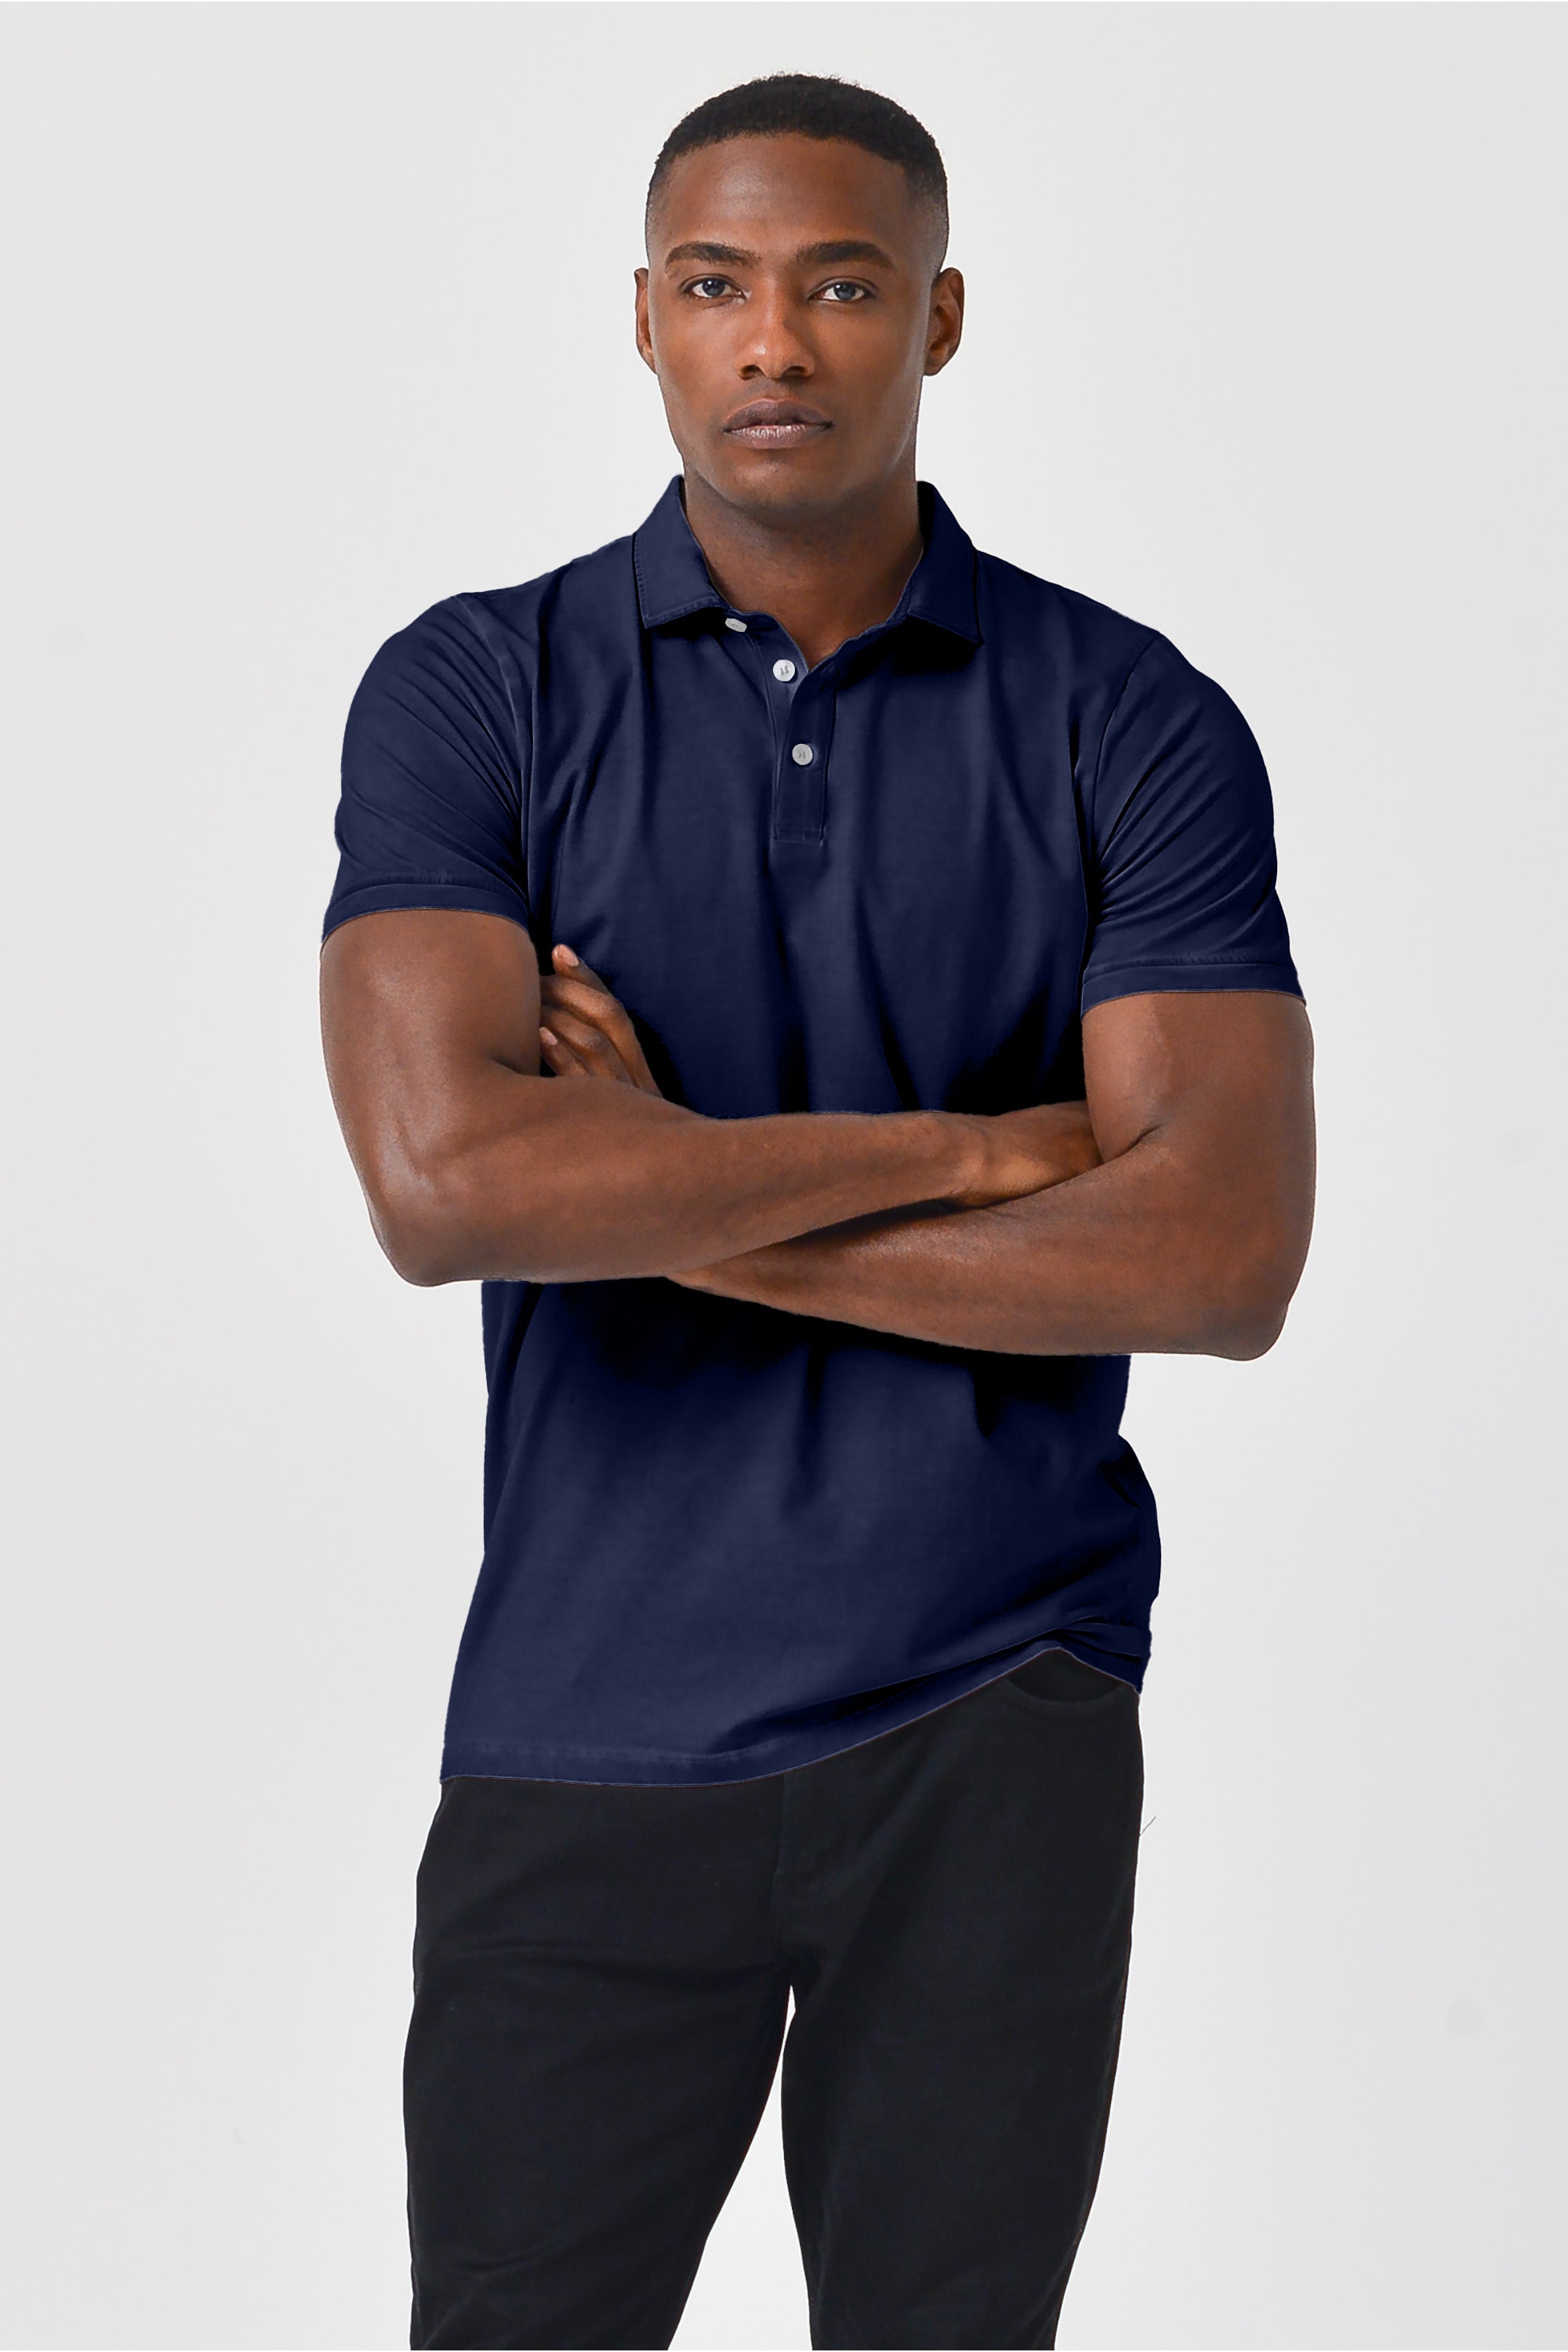 Performance Polo in Navy